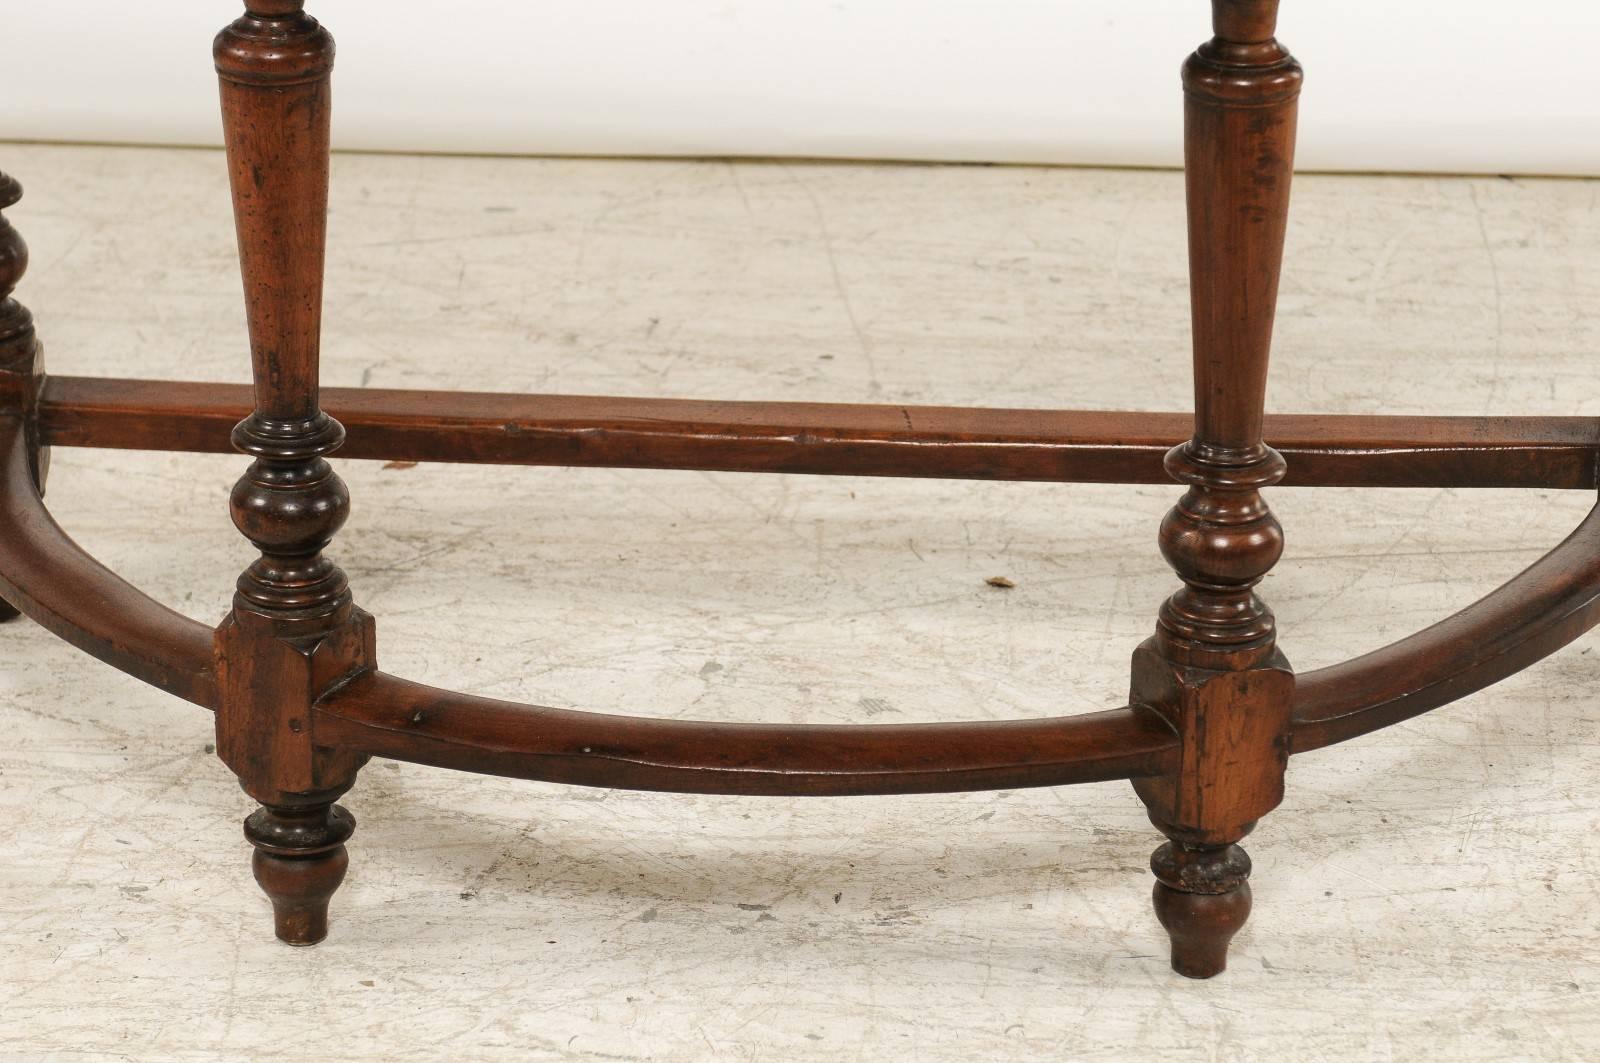 Pair of Large 1820s Italian Walnut Demilune Console Tables with Turned Legs 5